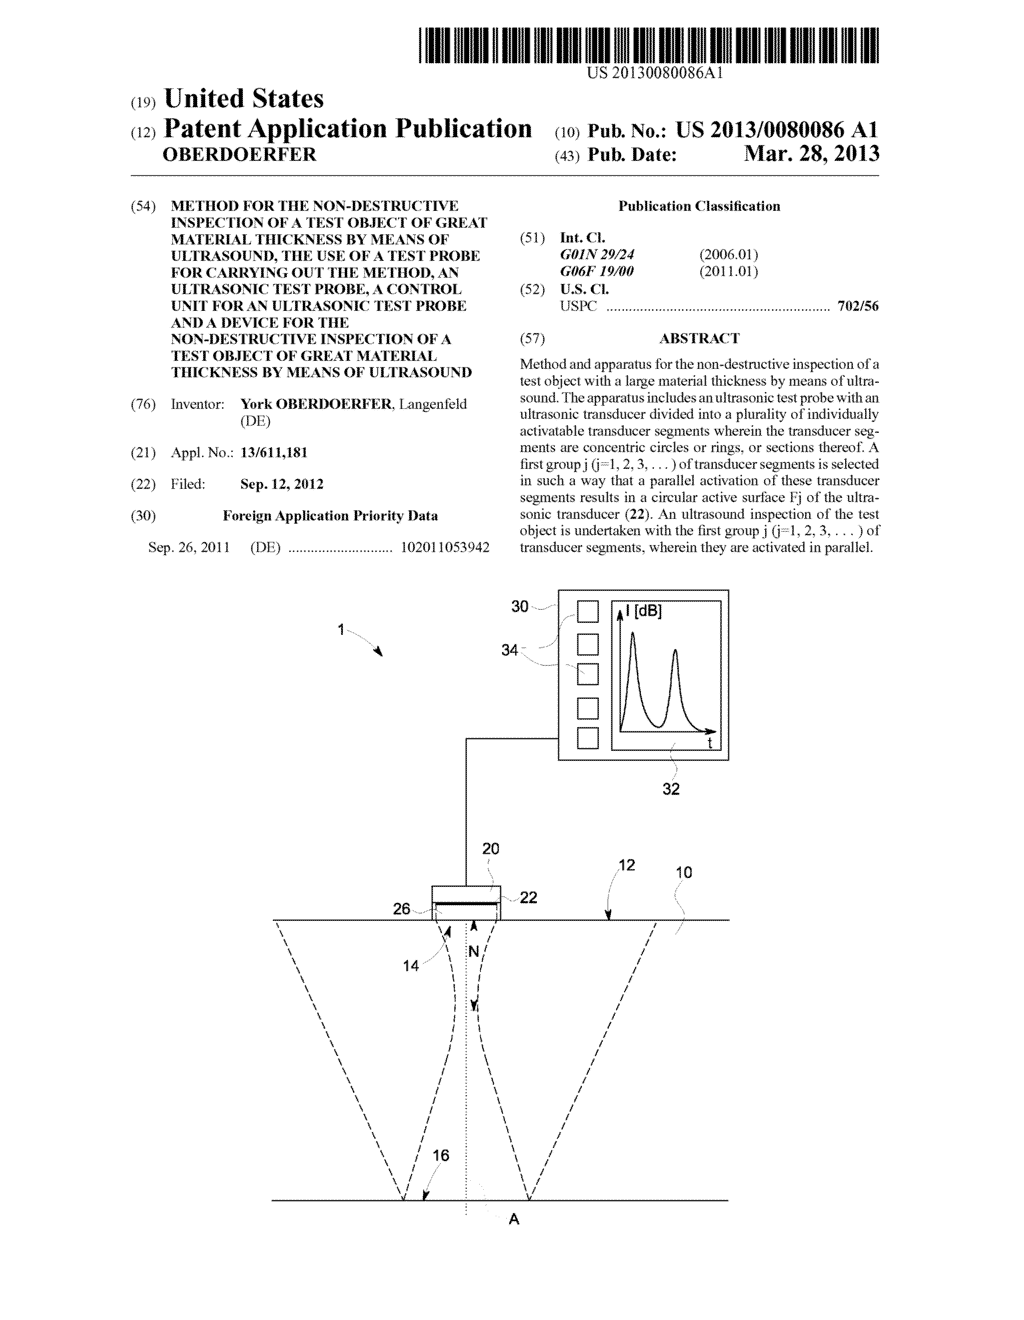 METHOD FOR THE NON-DESTRUCTIVE INSPECTION OF A TEST OBJECT  OF GREAT     MATERIAL THICKNESS BY MEANS OF ULTRASOUND, THE USE OF A TEST PROBE FOR     CARRYING OUT THE METHOD, AN ULTRASONIC TEST PROBE, A CONTROL UNIT FOR AN     ULTRASONIC TEST PROBE AND A DEVICE FOR THE NON-DESTRUCTIVE INSPECTION OF     A TEST OBJECT OF GREAT MATERIAL THICKNESS BY MEANS OF ULTRASOUND - diagram, schematic, and image 01